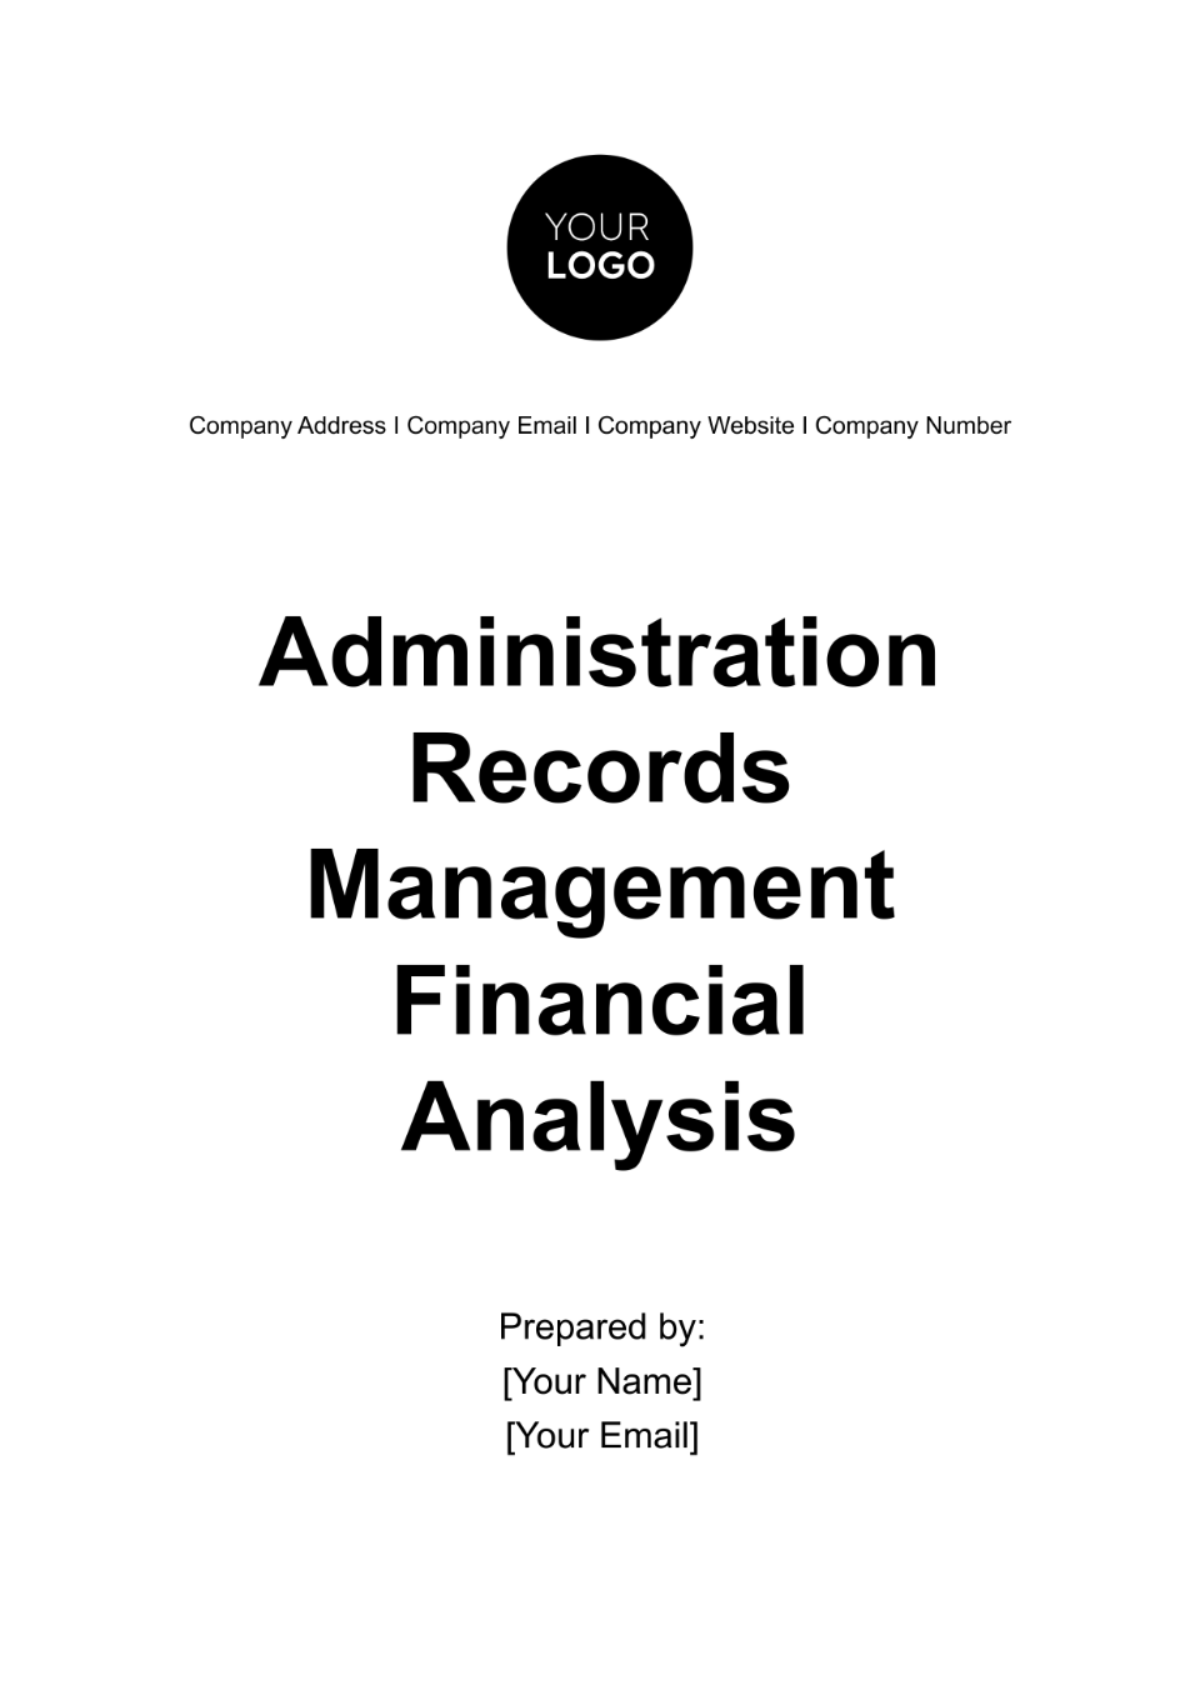 Administration Records Management Financial Analysis Template